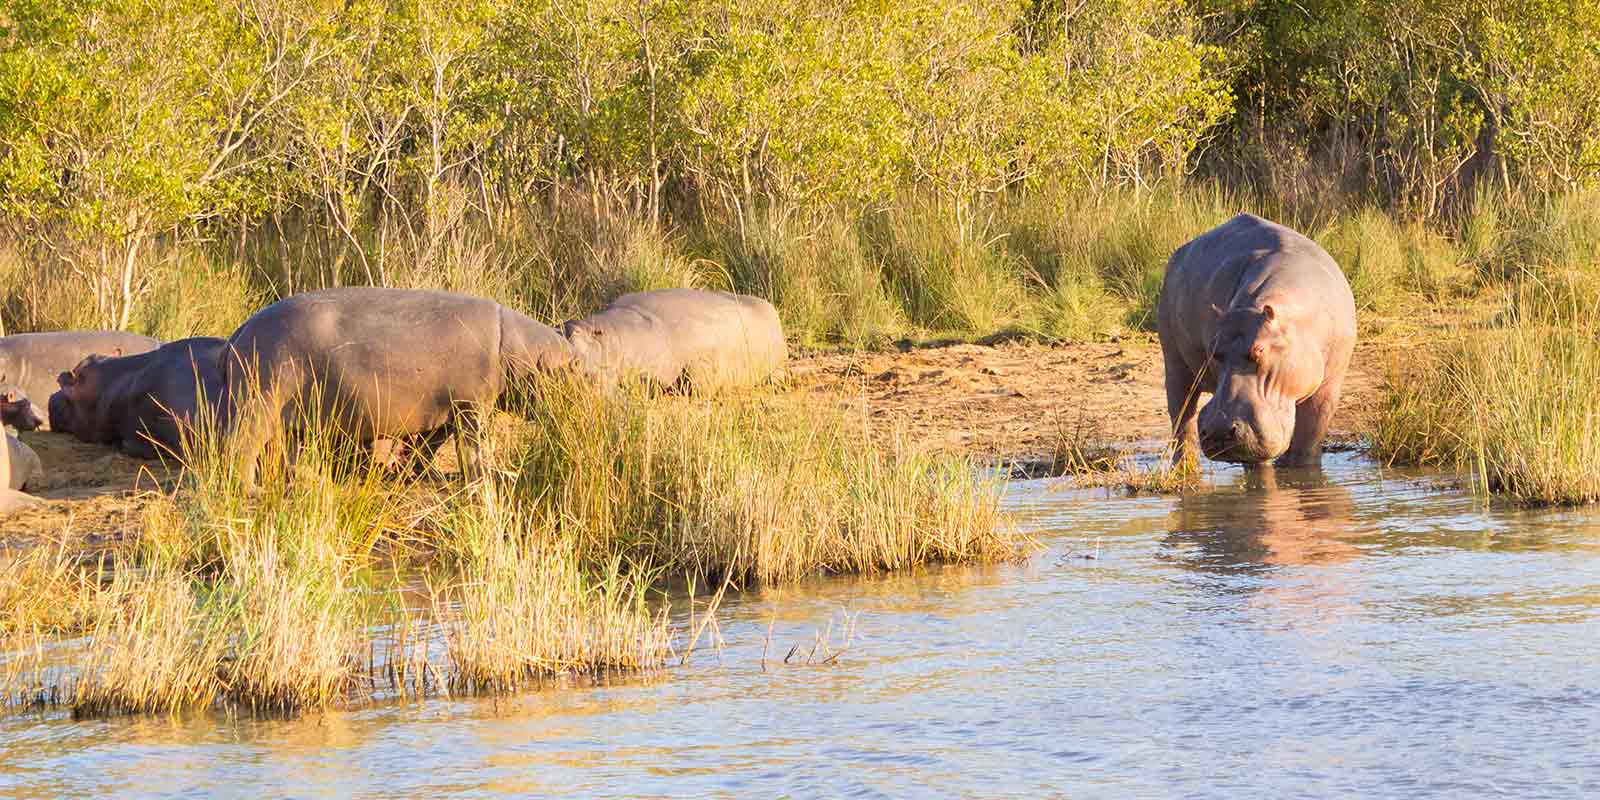 Hippos relaxing on the river banks in isimangaliso wetland park in south africa